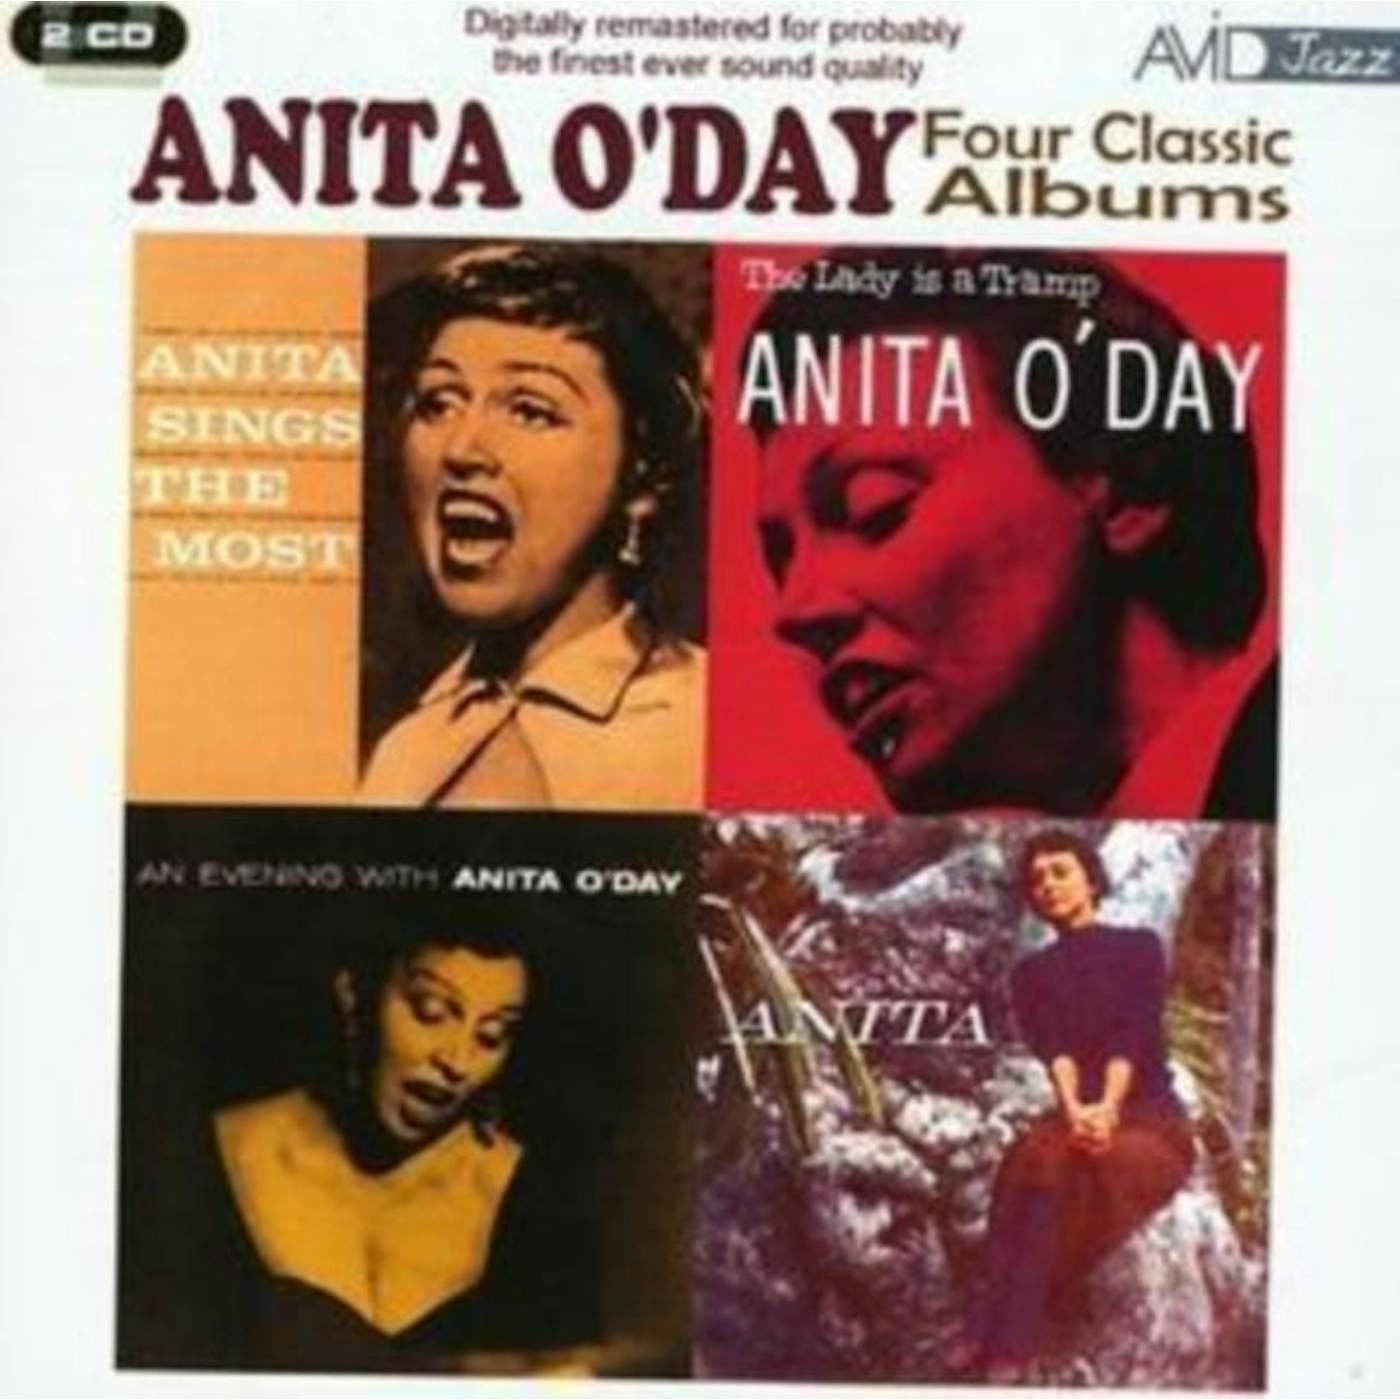 Anita O'day CD - Four Classic Albums (Anita Sings The Most / The Lady Is A Tramp / An Evening With Anita O'day / Anita)